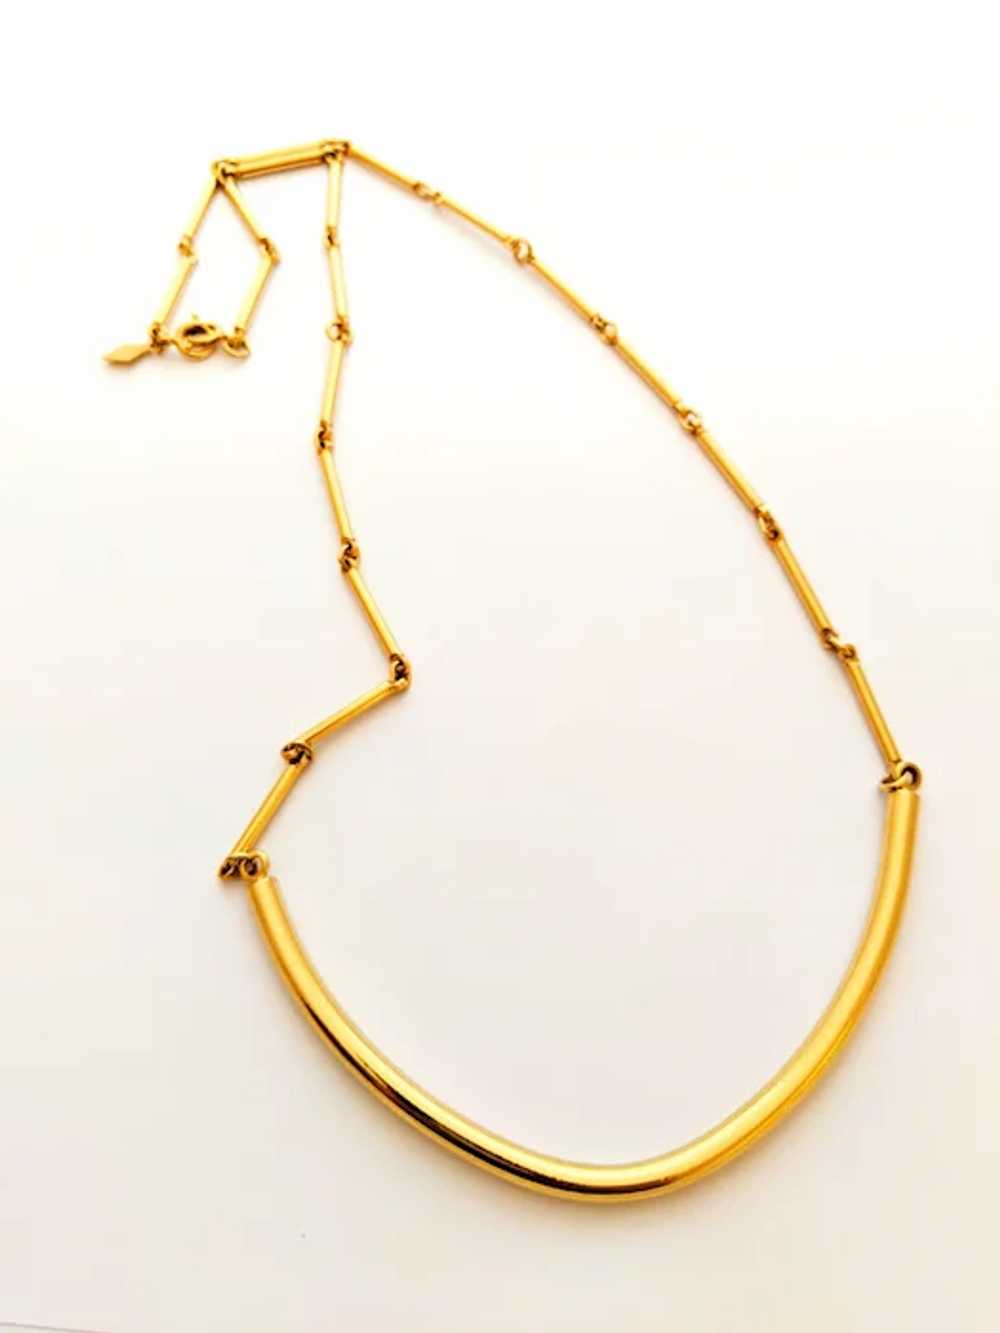 Signed Sarah Coventry Gold Tone Bar Necklace - image 4